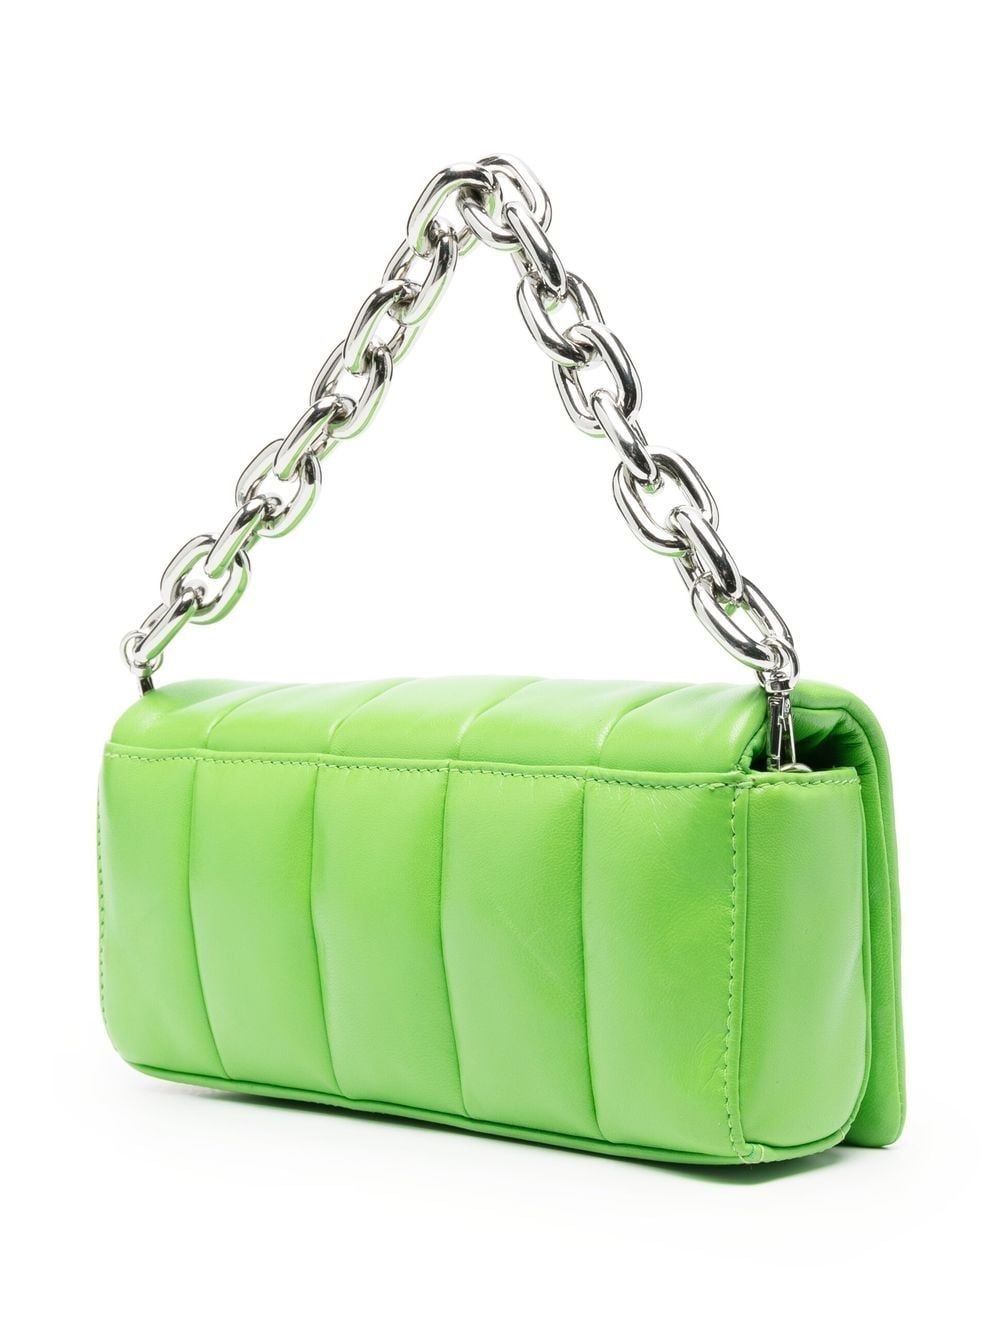 Hera quilted leather clutch bag - 4